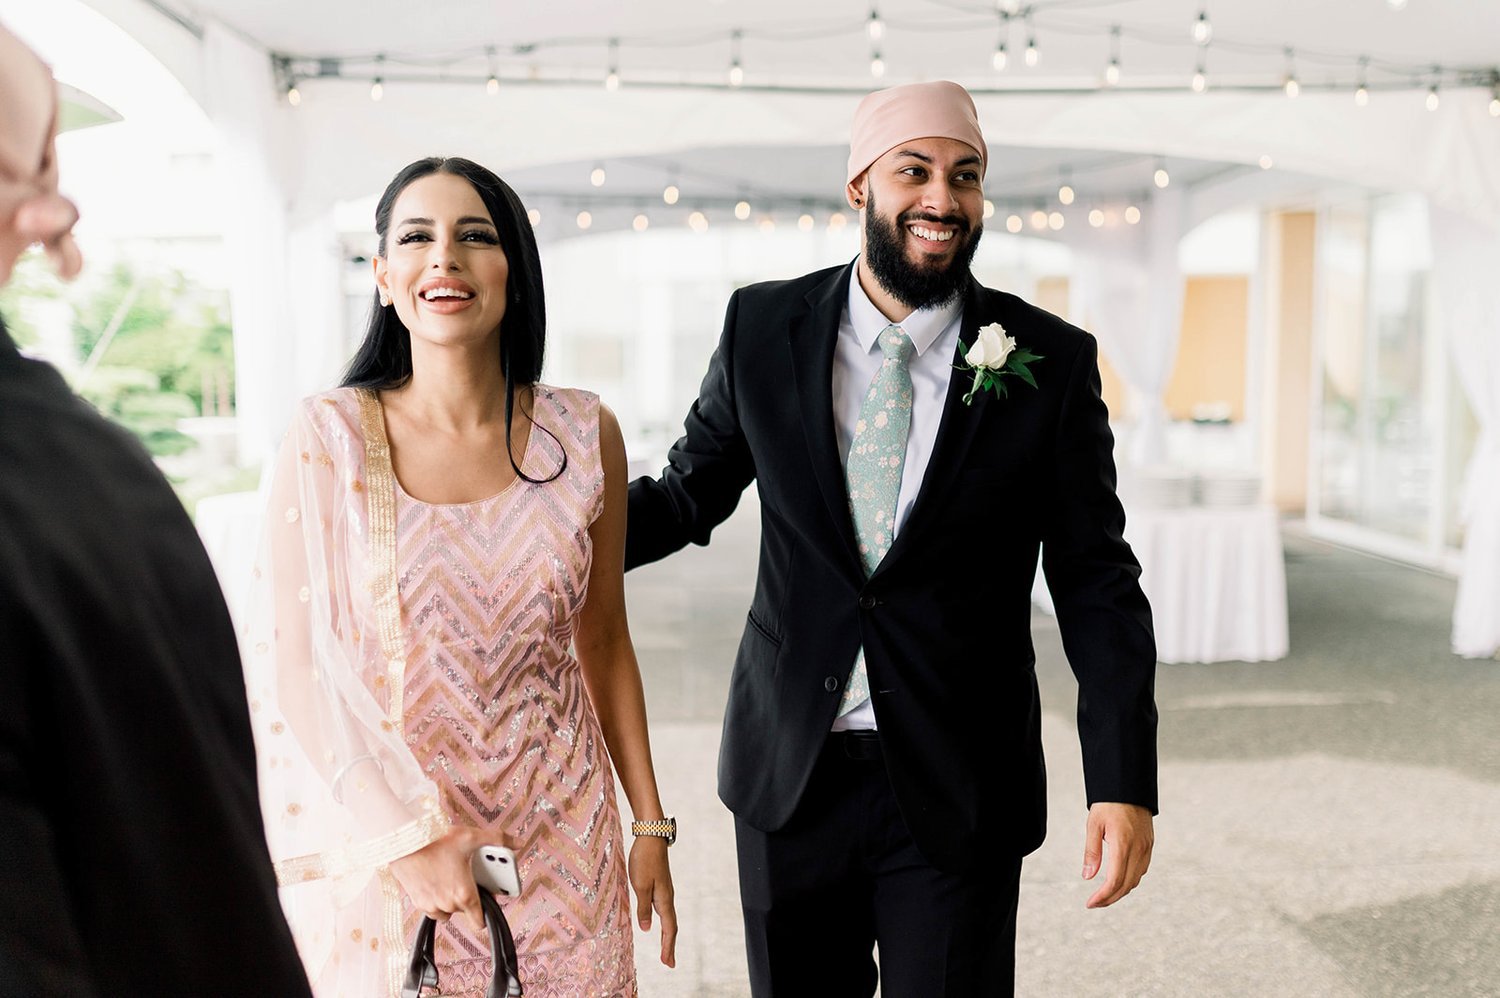 Wedding guest smile as they arrive at a Sikh Ceremony in Victoria BC